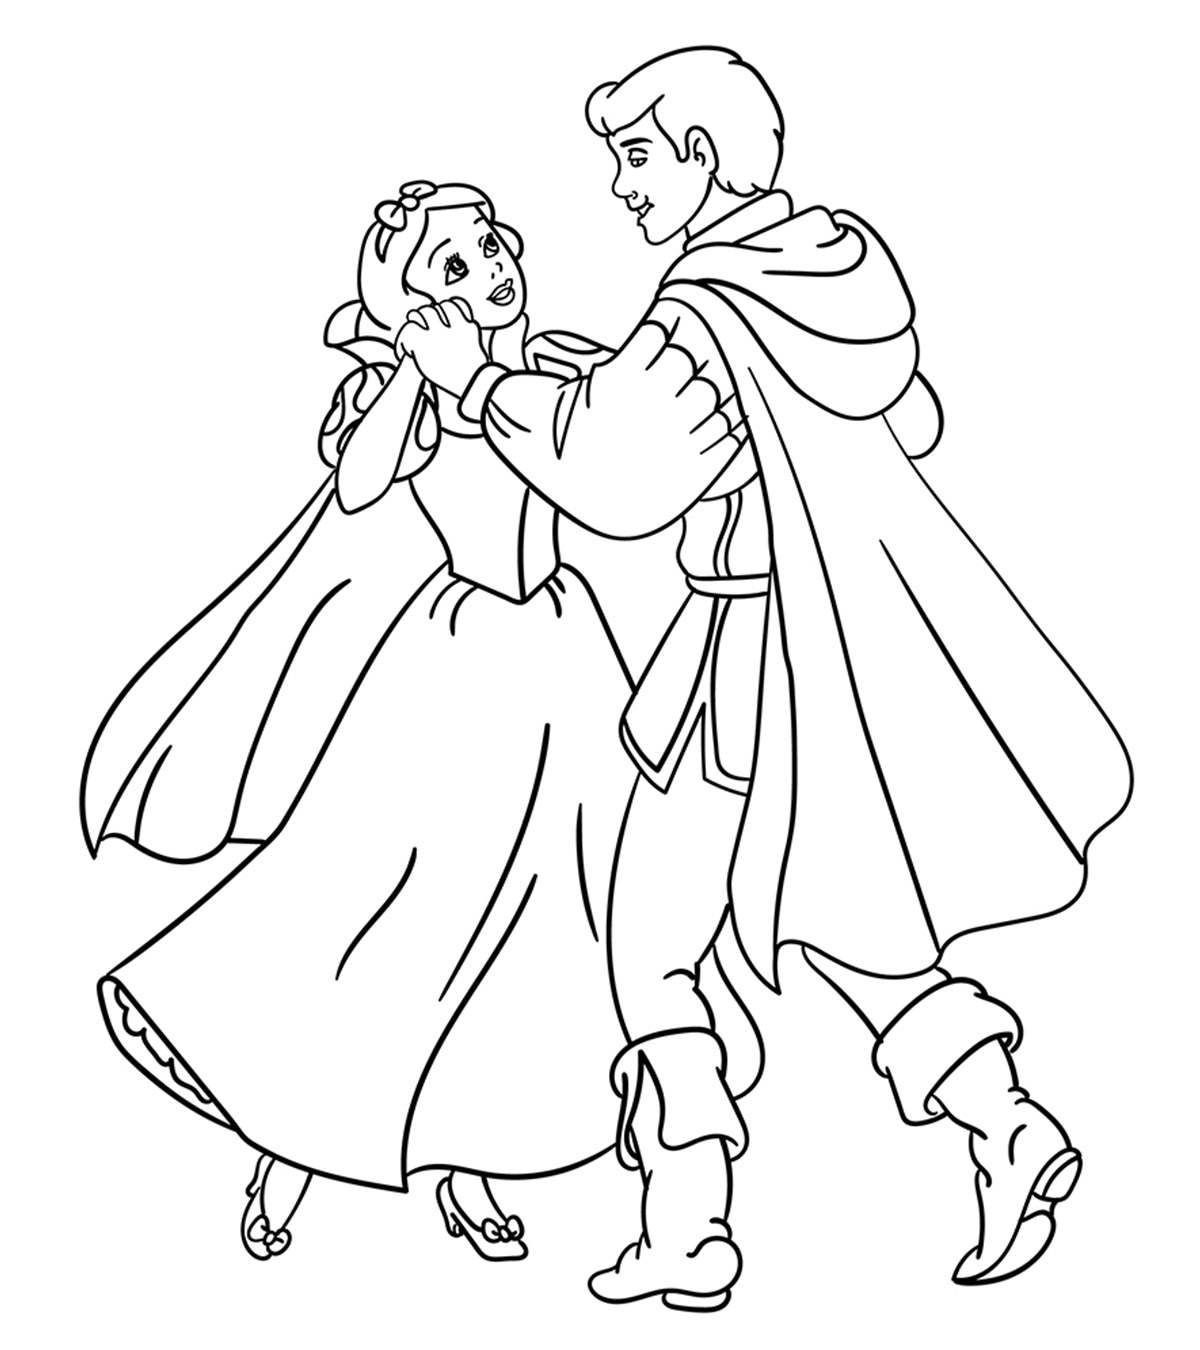 20 Beautiful Snow White Coloring Pages For Your Little Ones